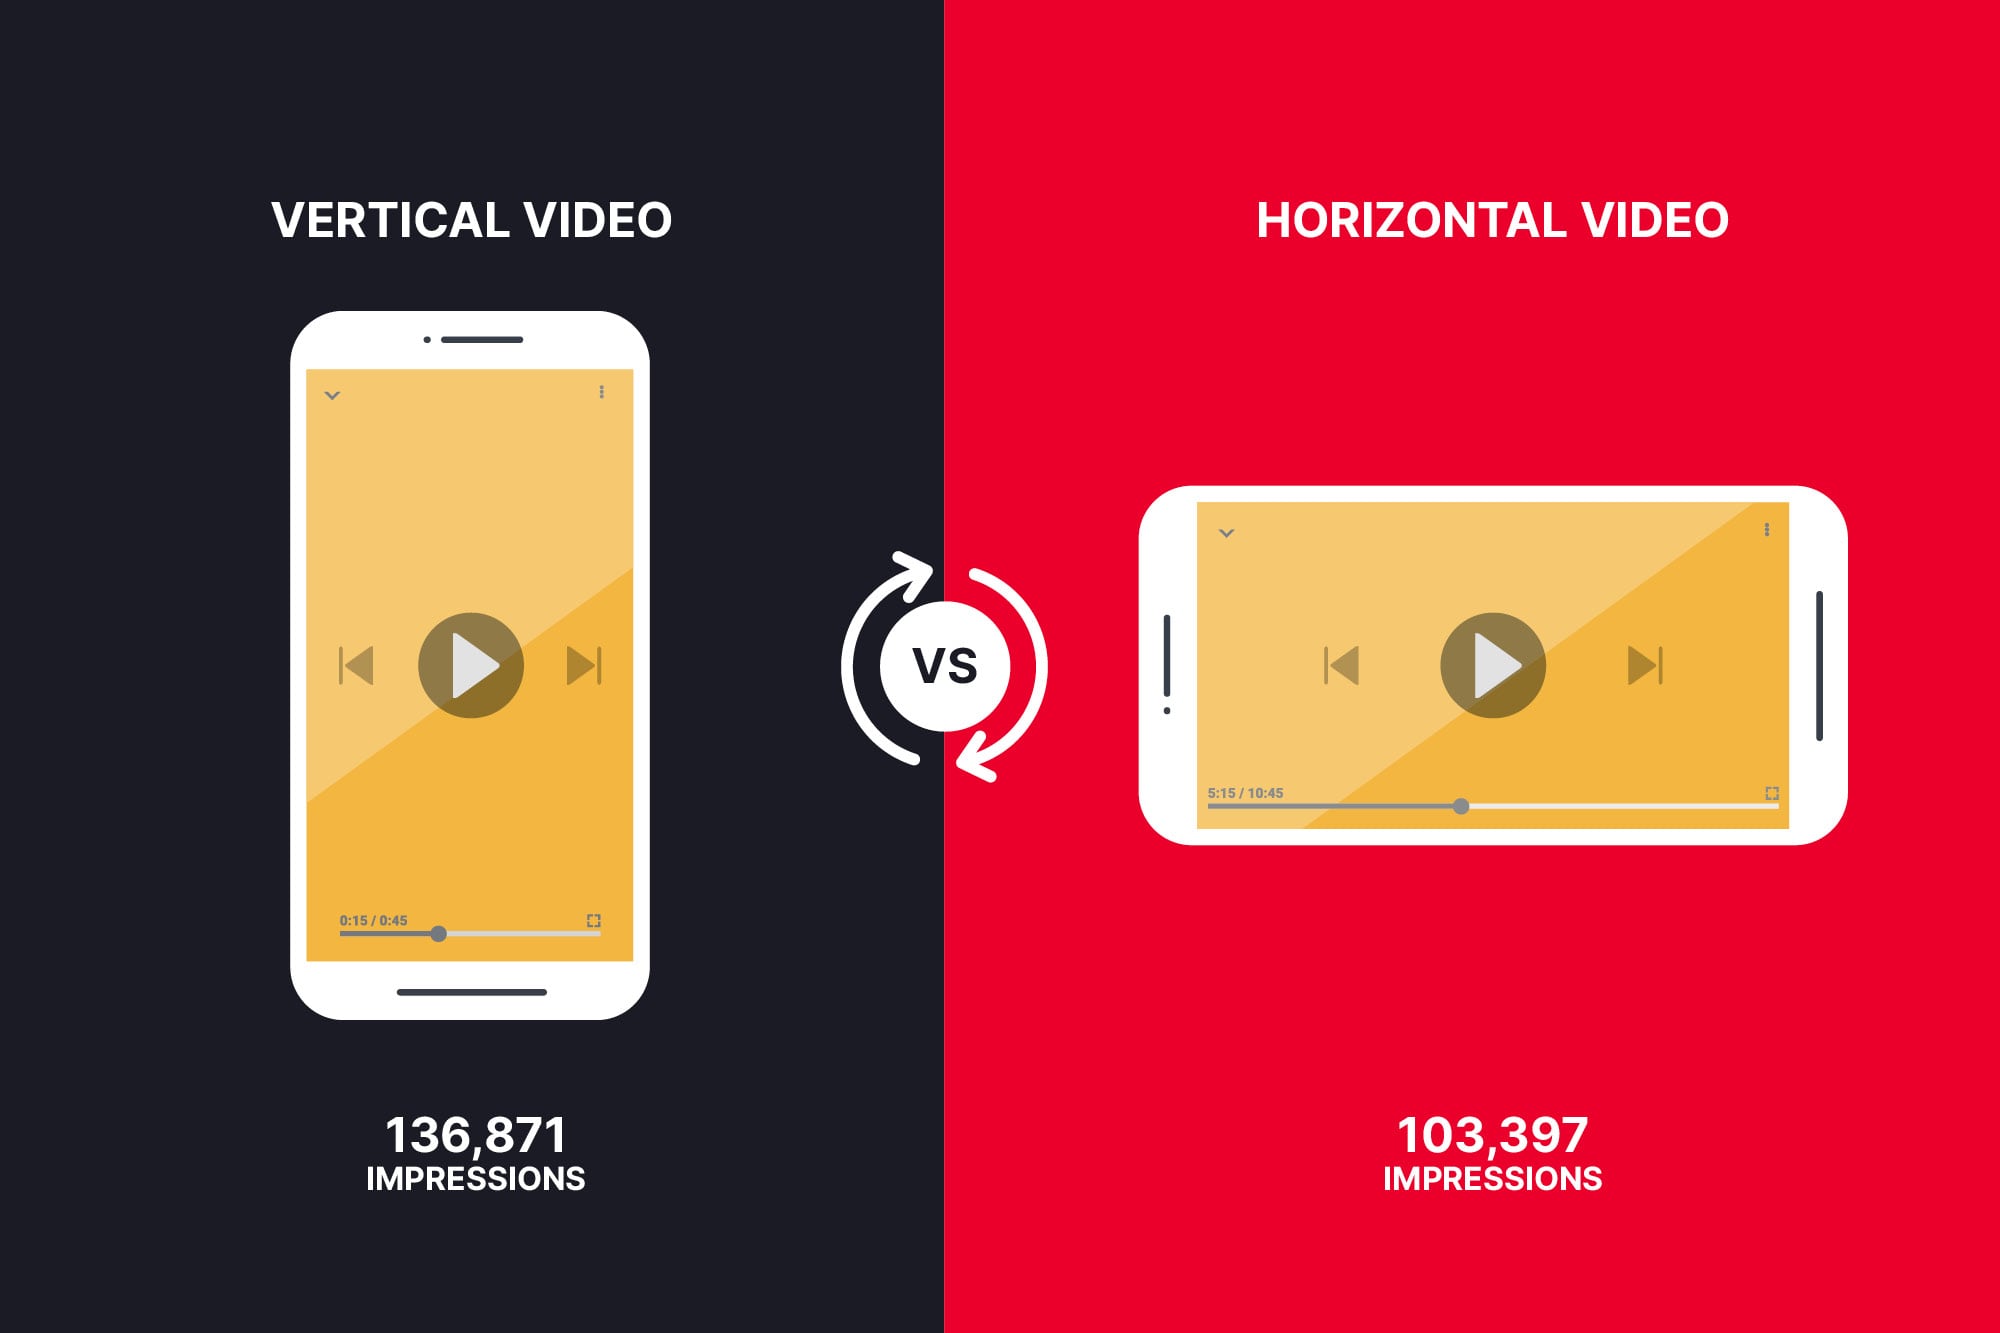 Impressions from vertical video vs portrait video